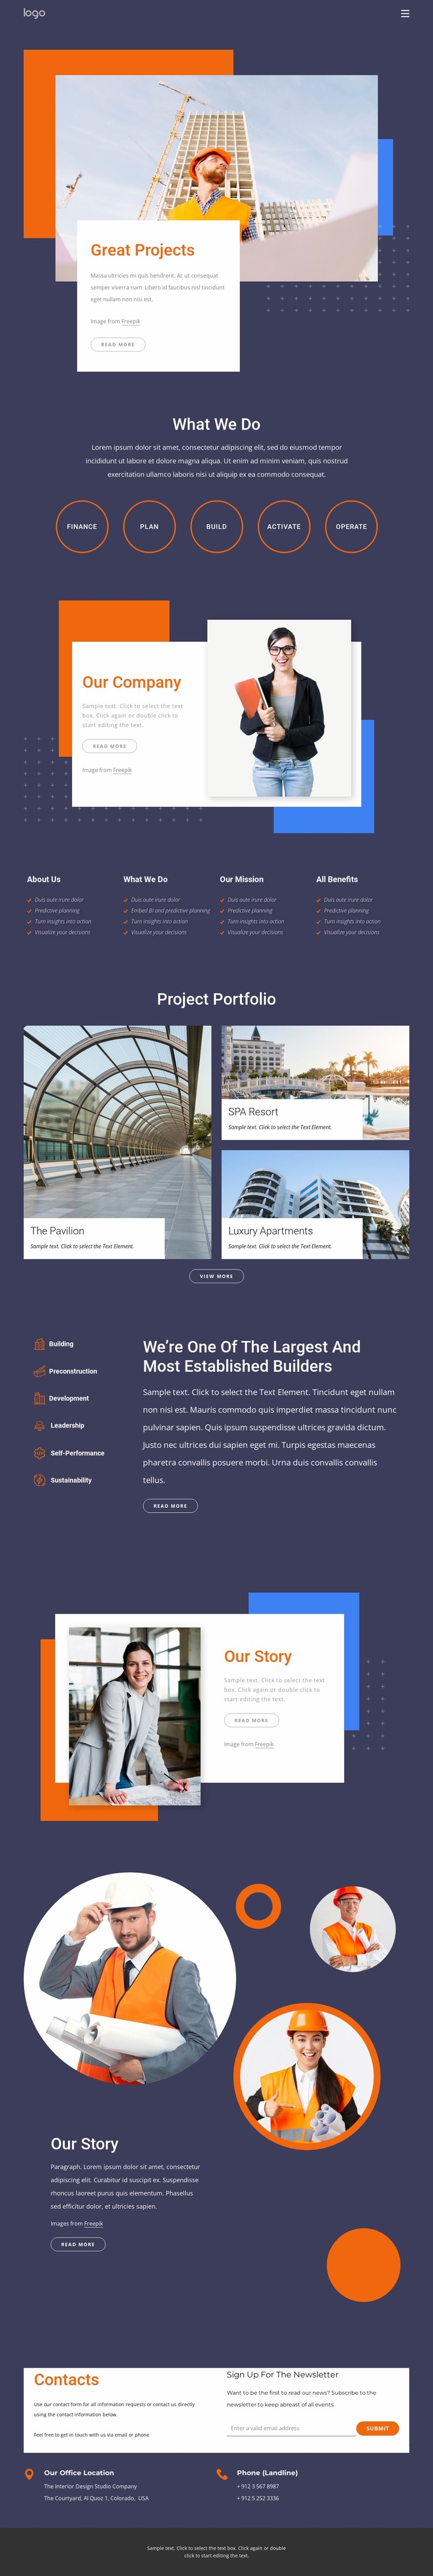 We specialise in delivering large complex building projects WordPress Website Builder